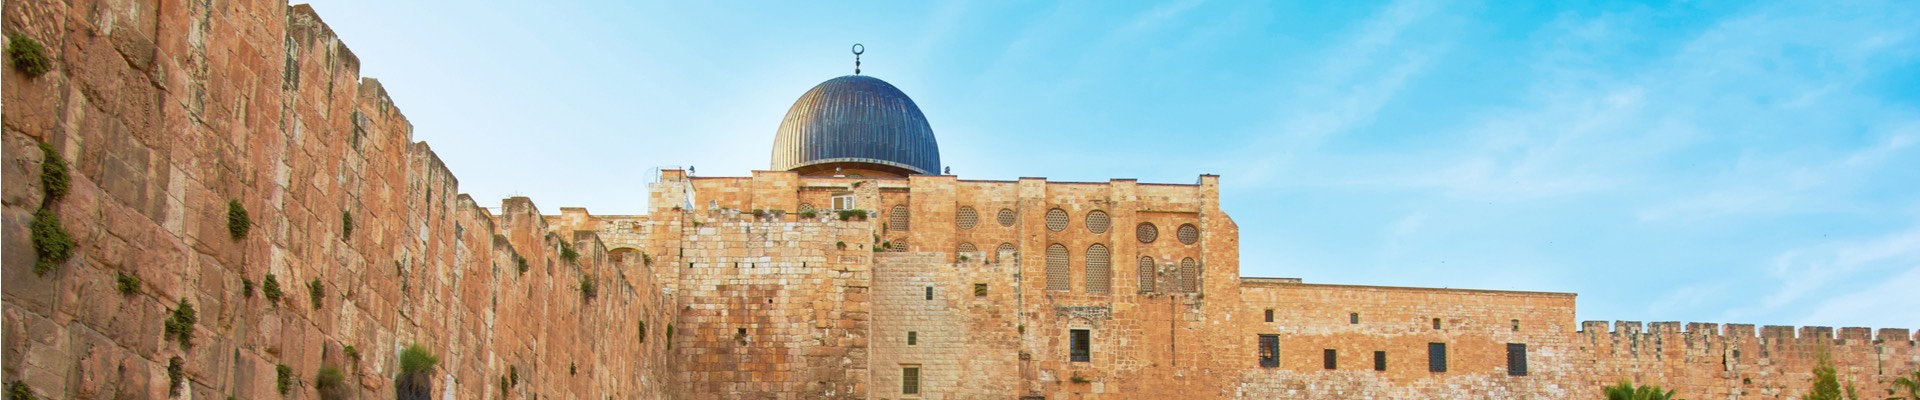 The Best of Israel with Underground Jerusalem 10 Day Tour